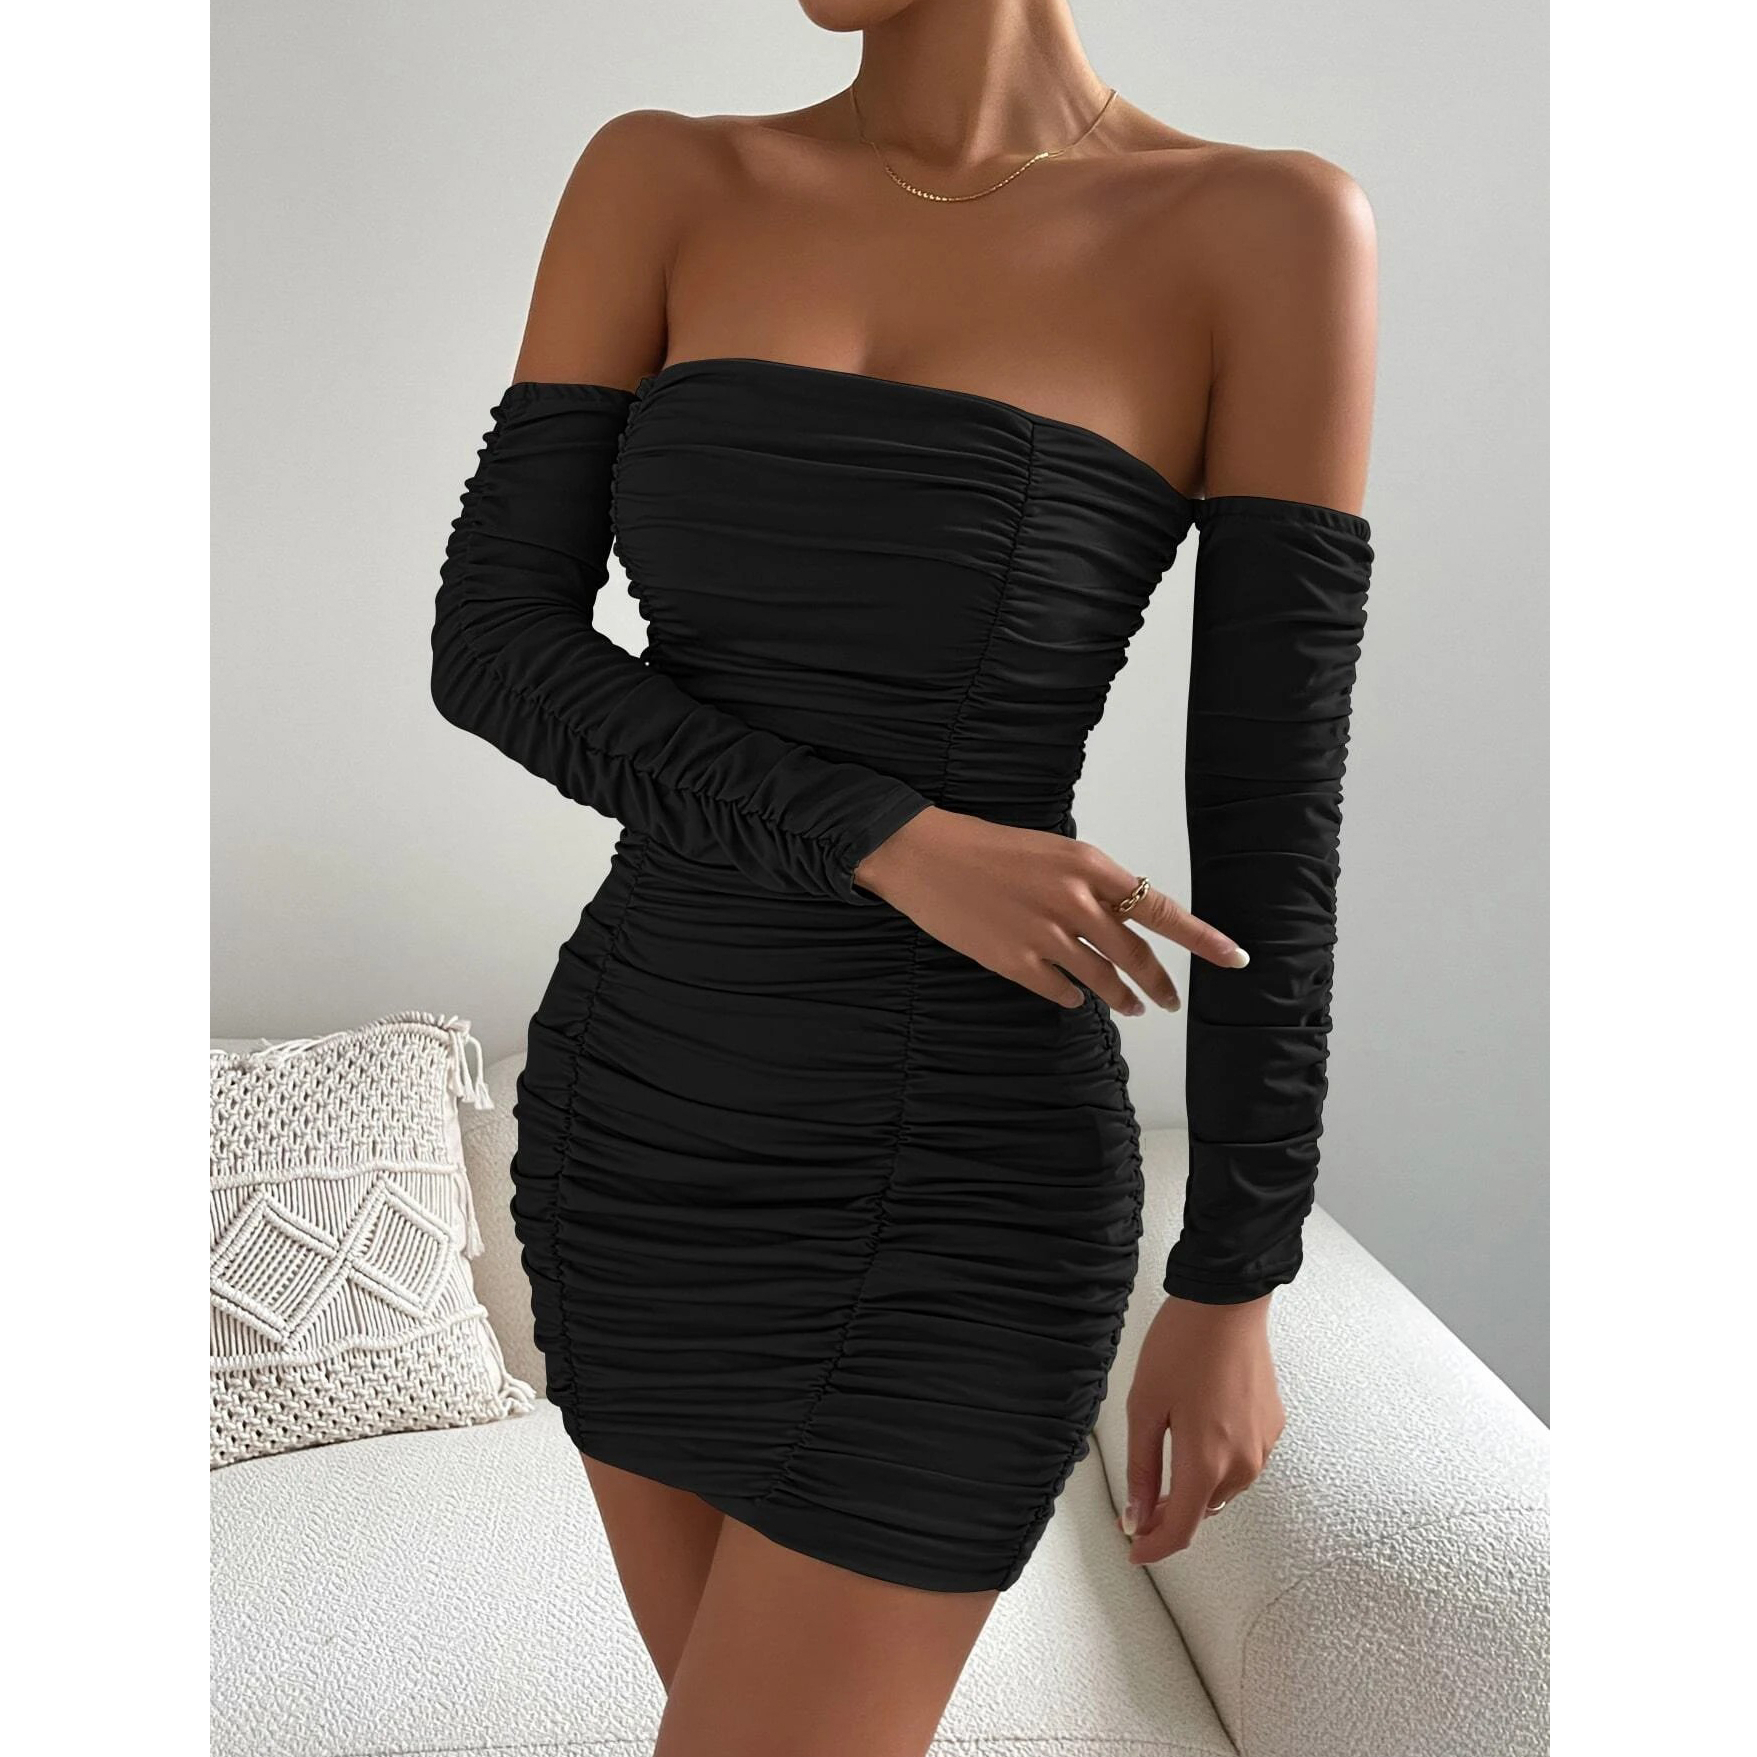 Off Shoulder Ruched Bodycon Dress - Black, X-Small(2)